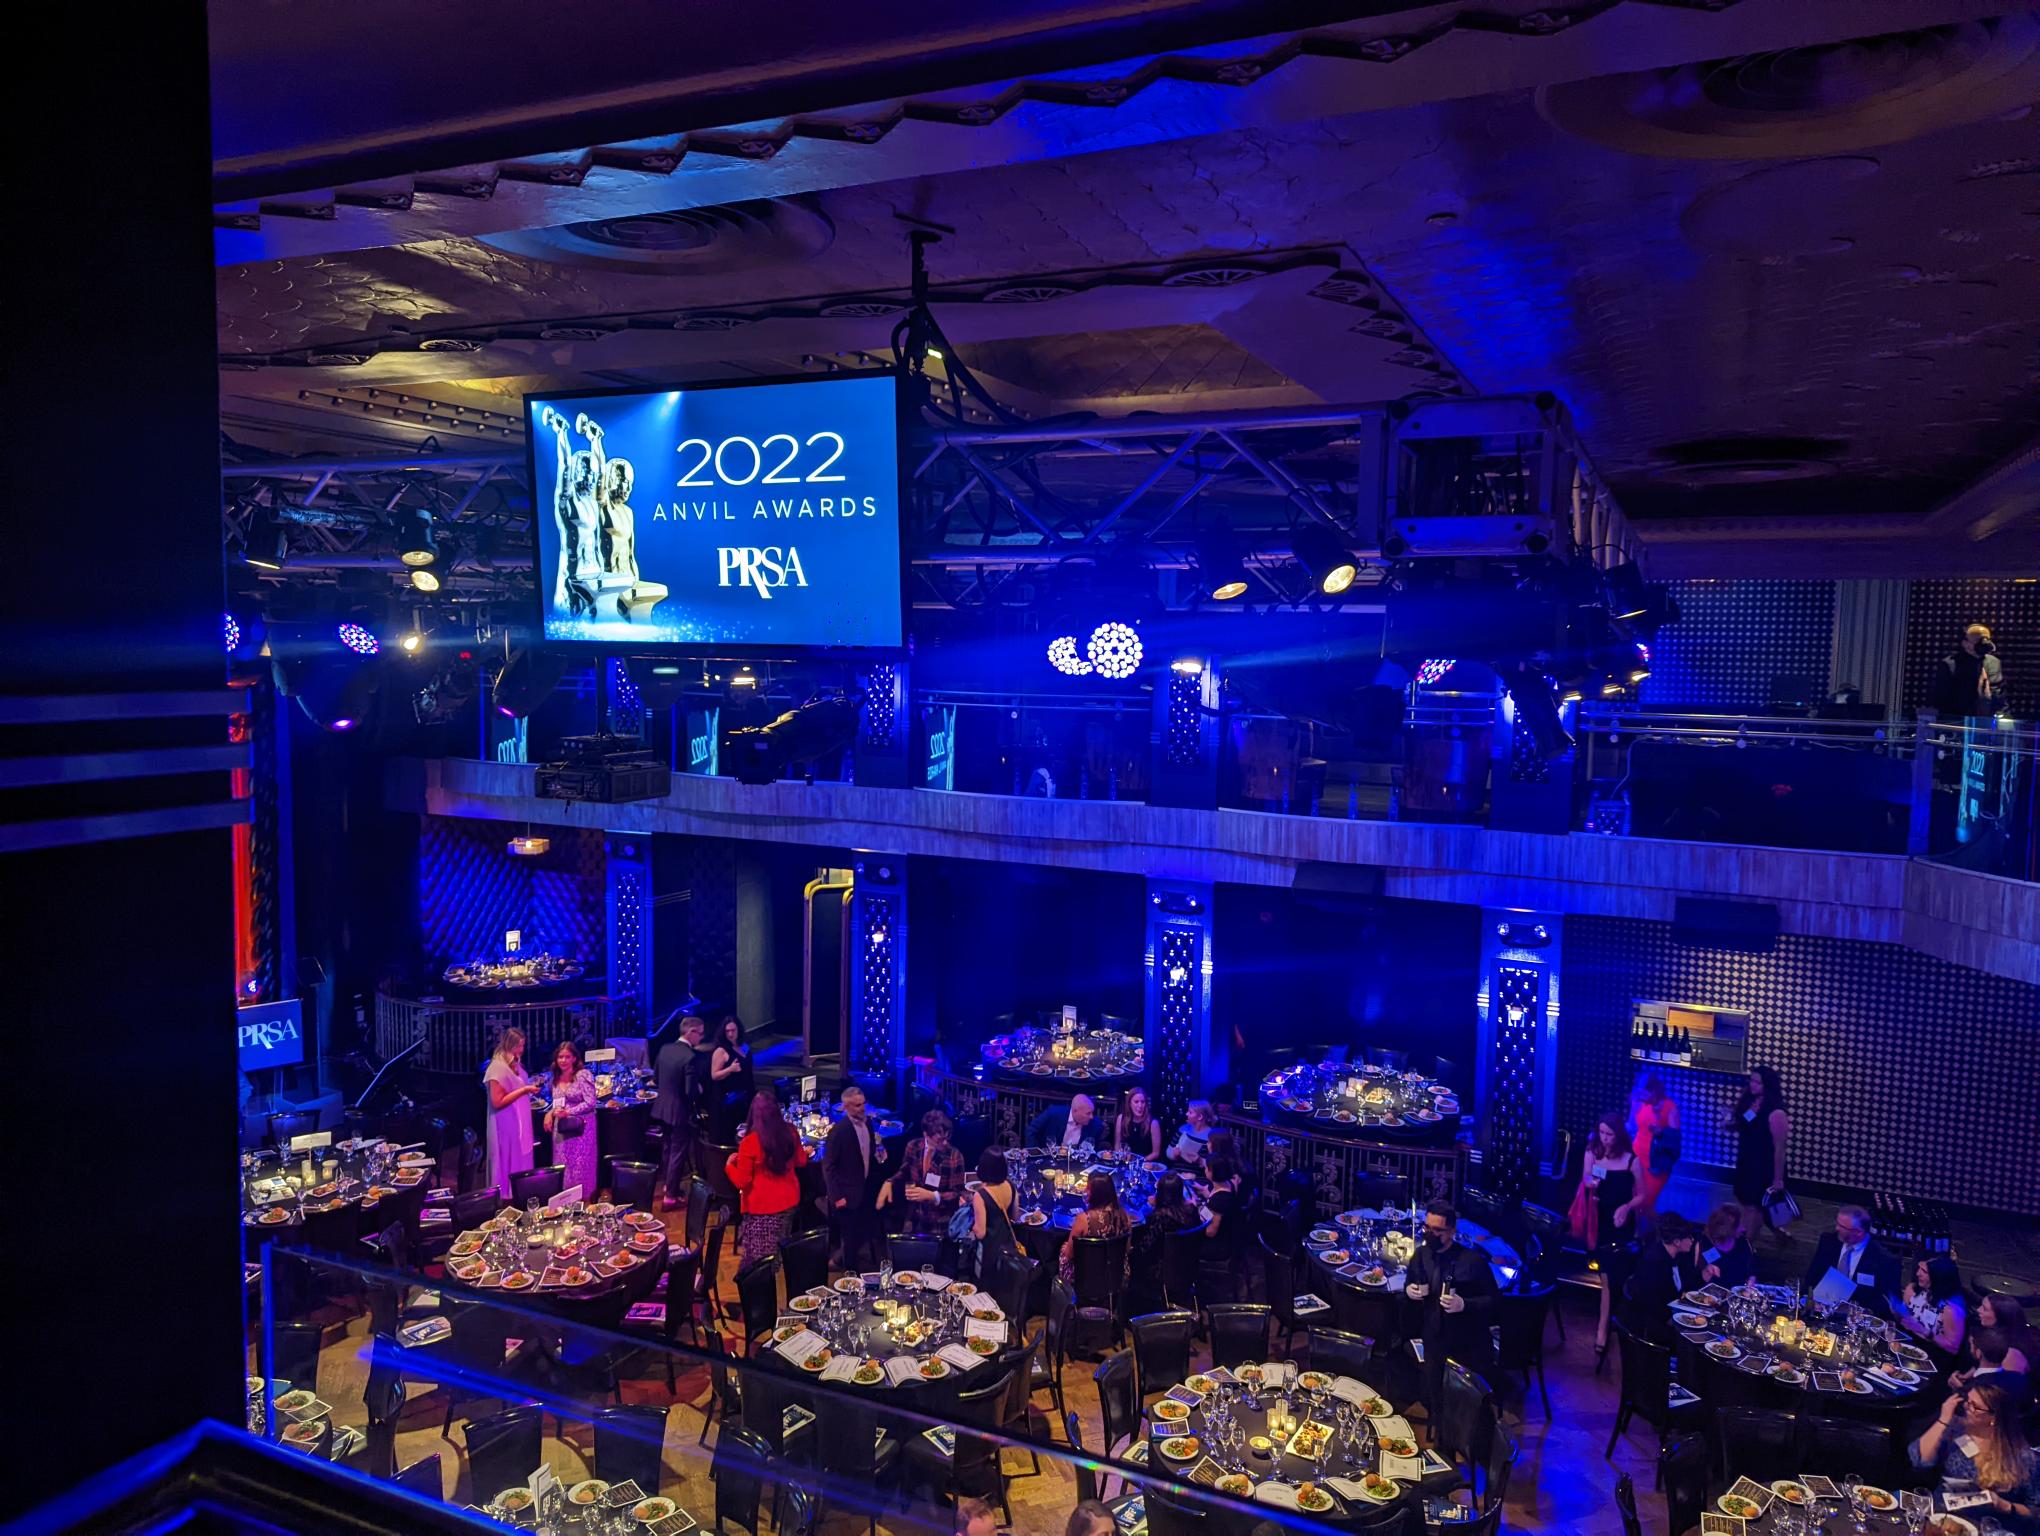 The ballroom during the 2022 Anvil Awards Ceremony